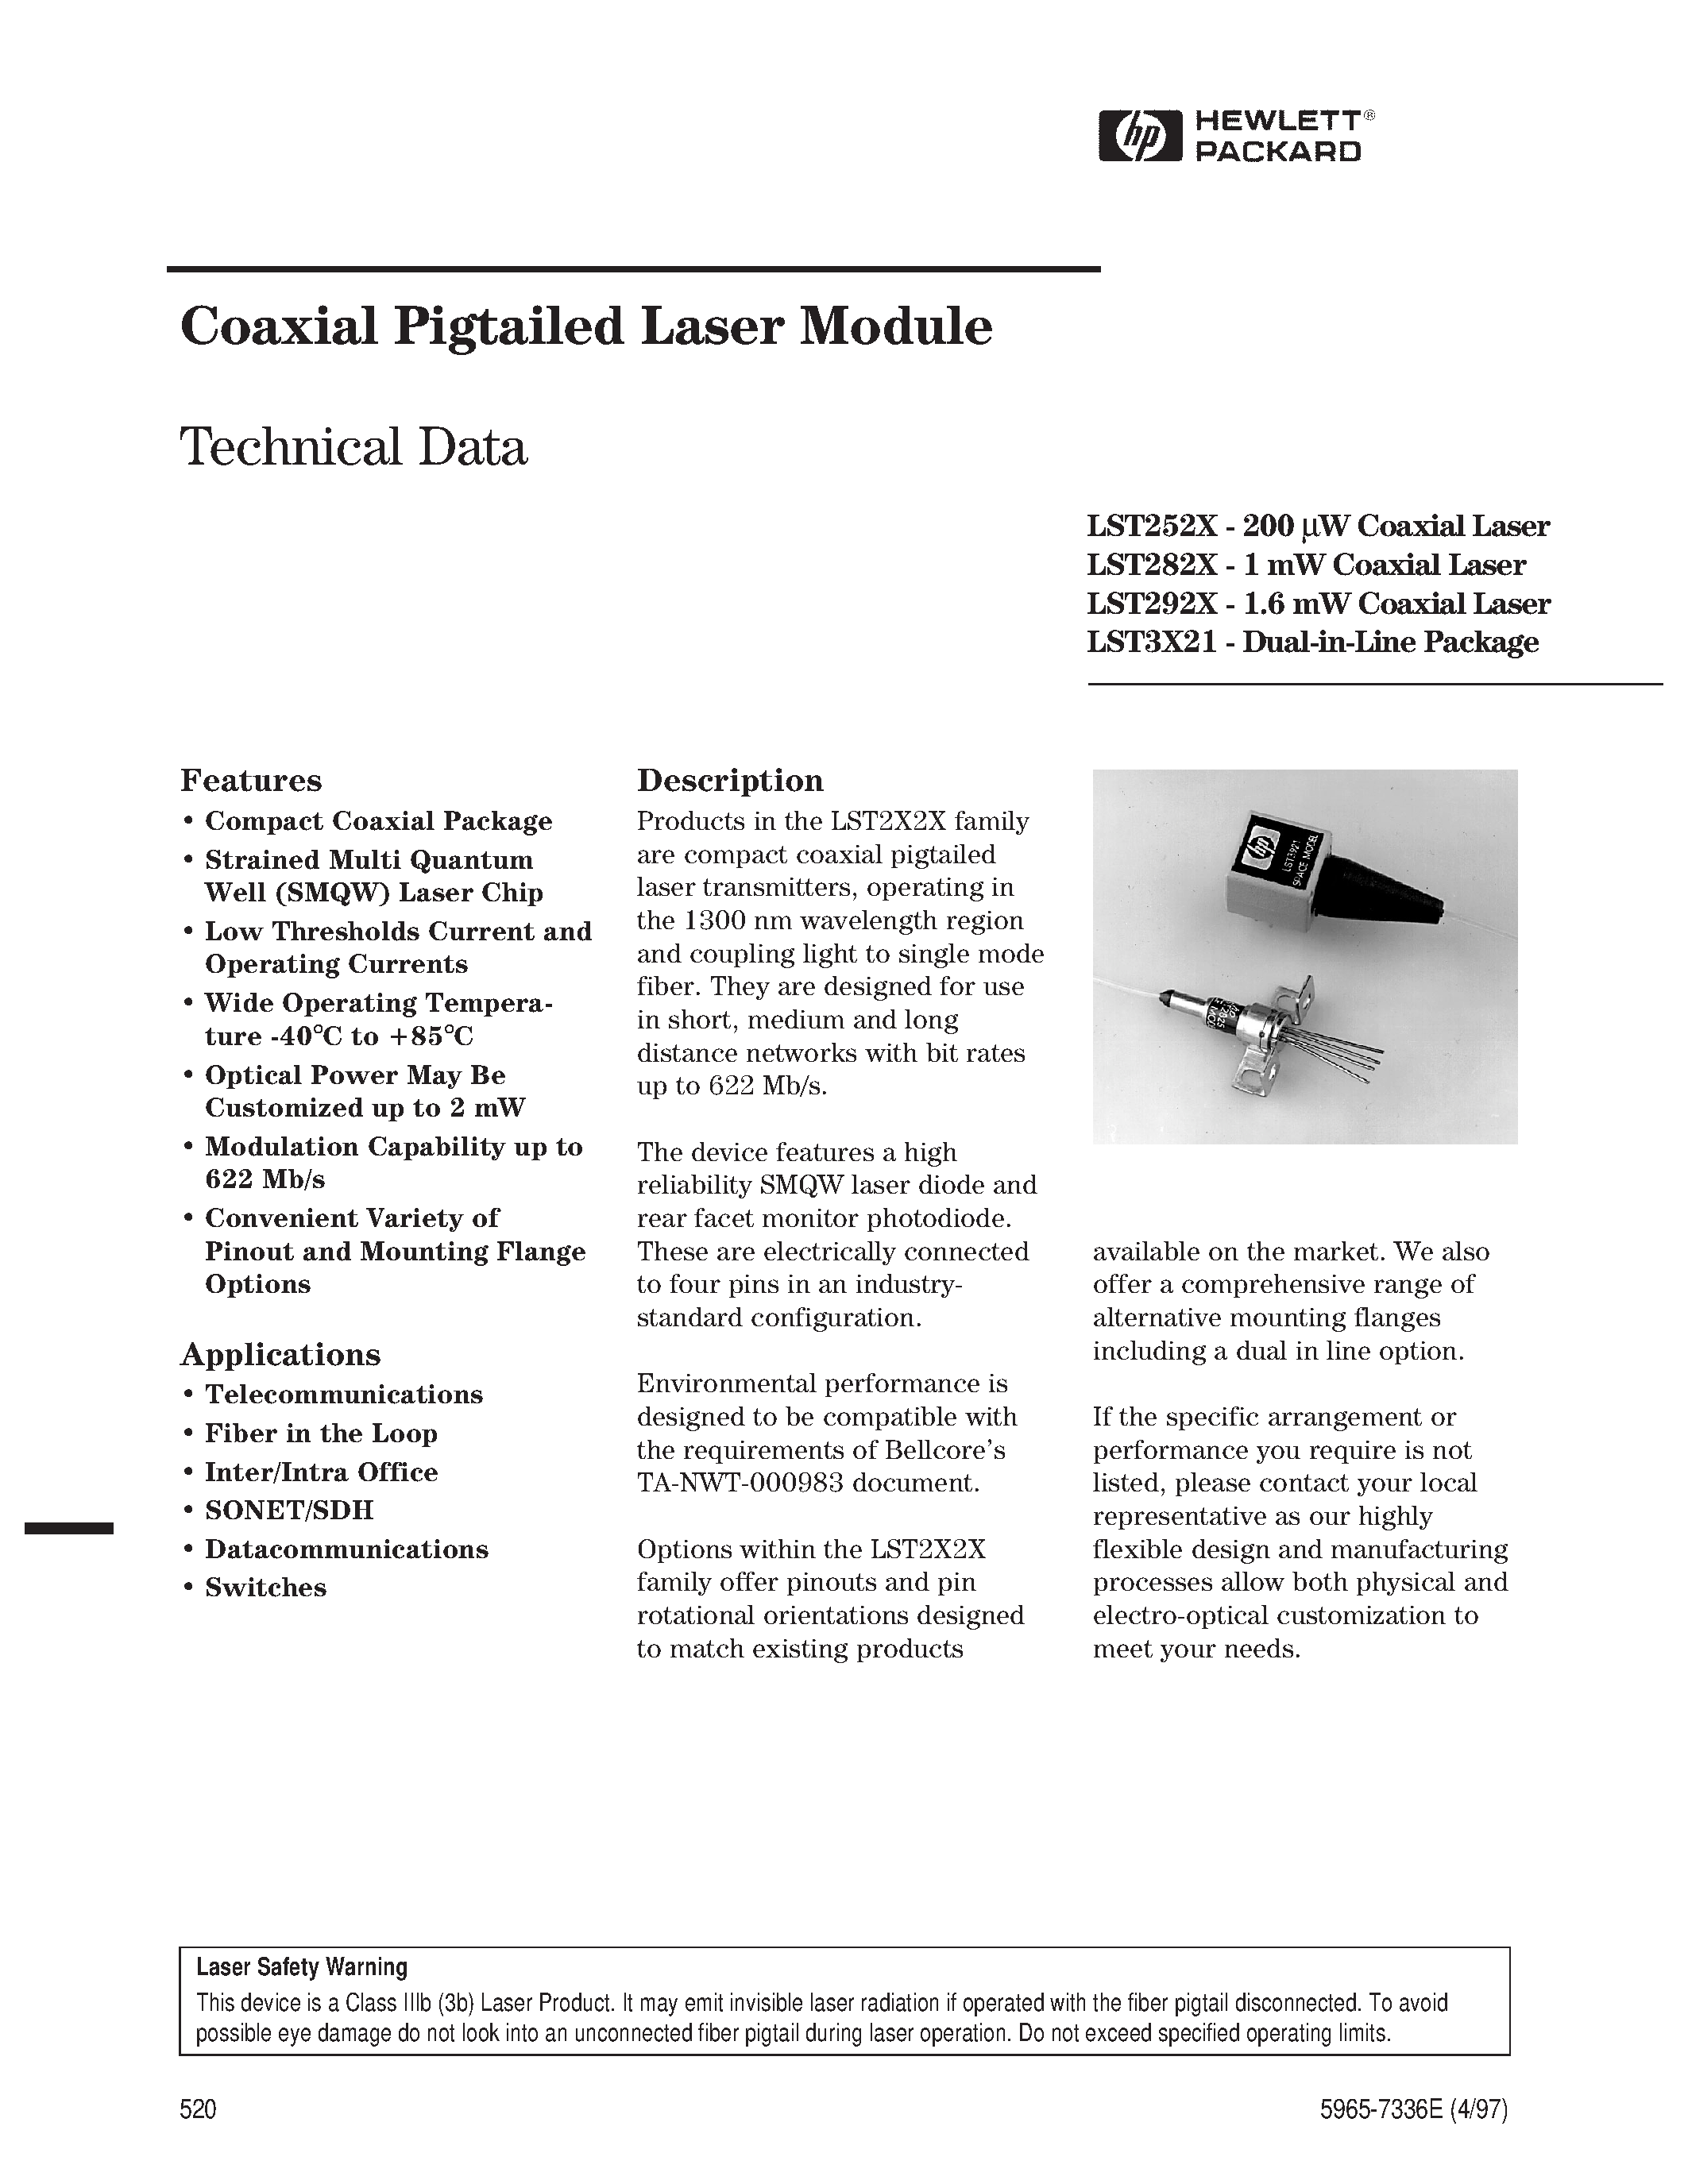 Даташит LST2925-S4-T-FP - Coaxial Pigtailed Laser Module страница 1